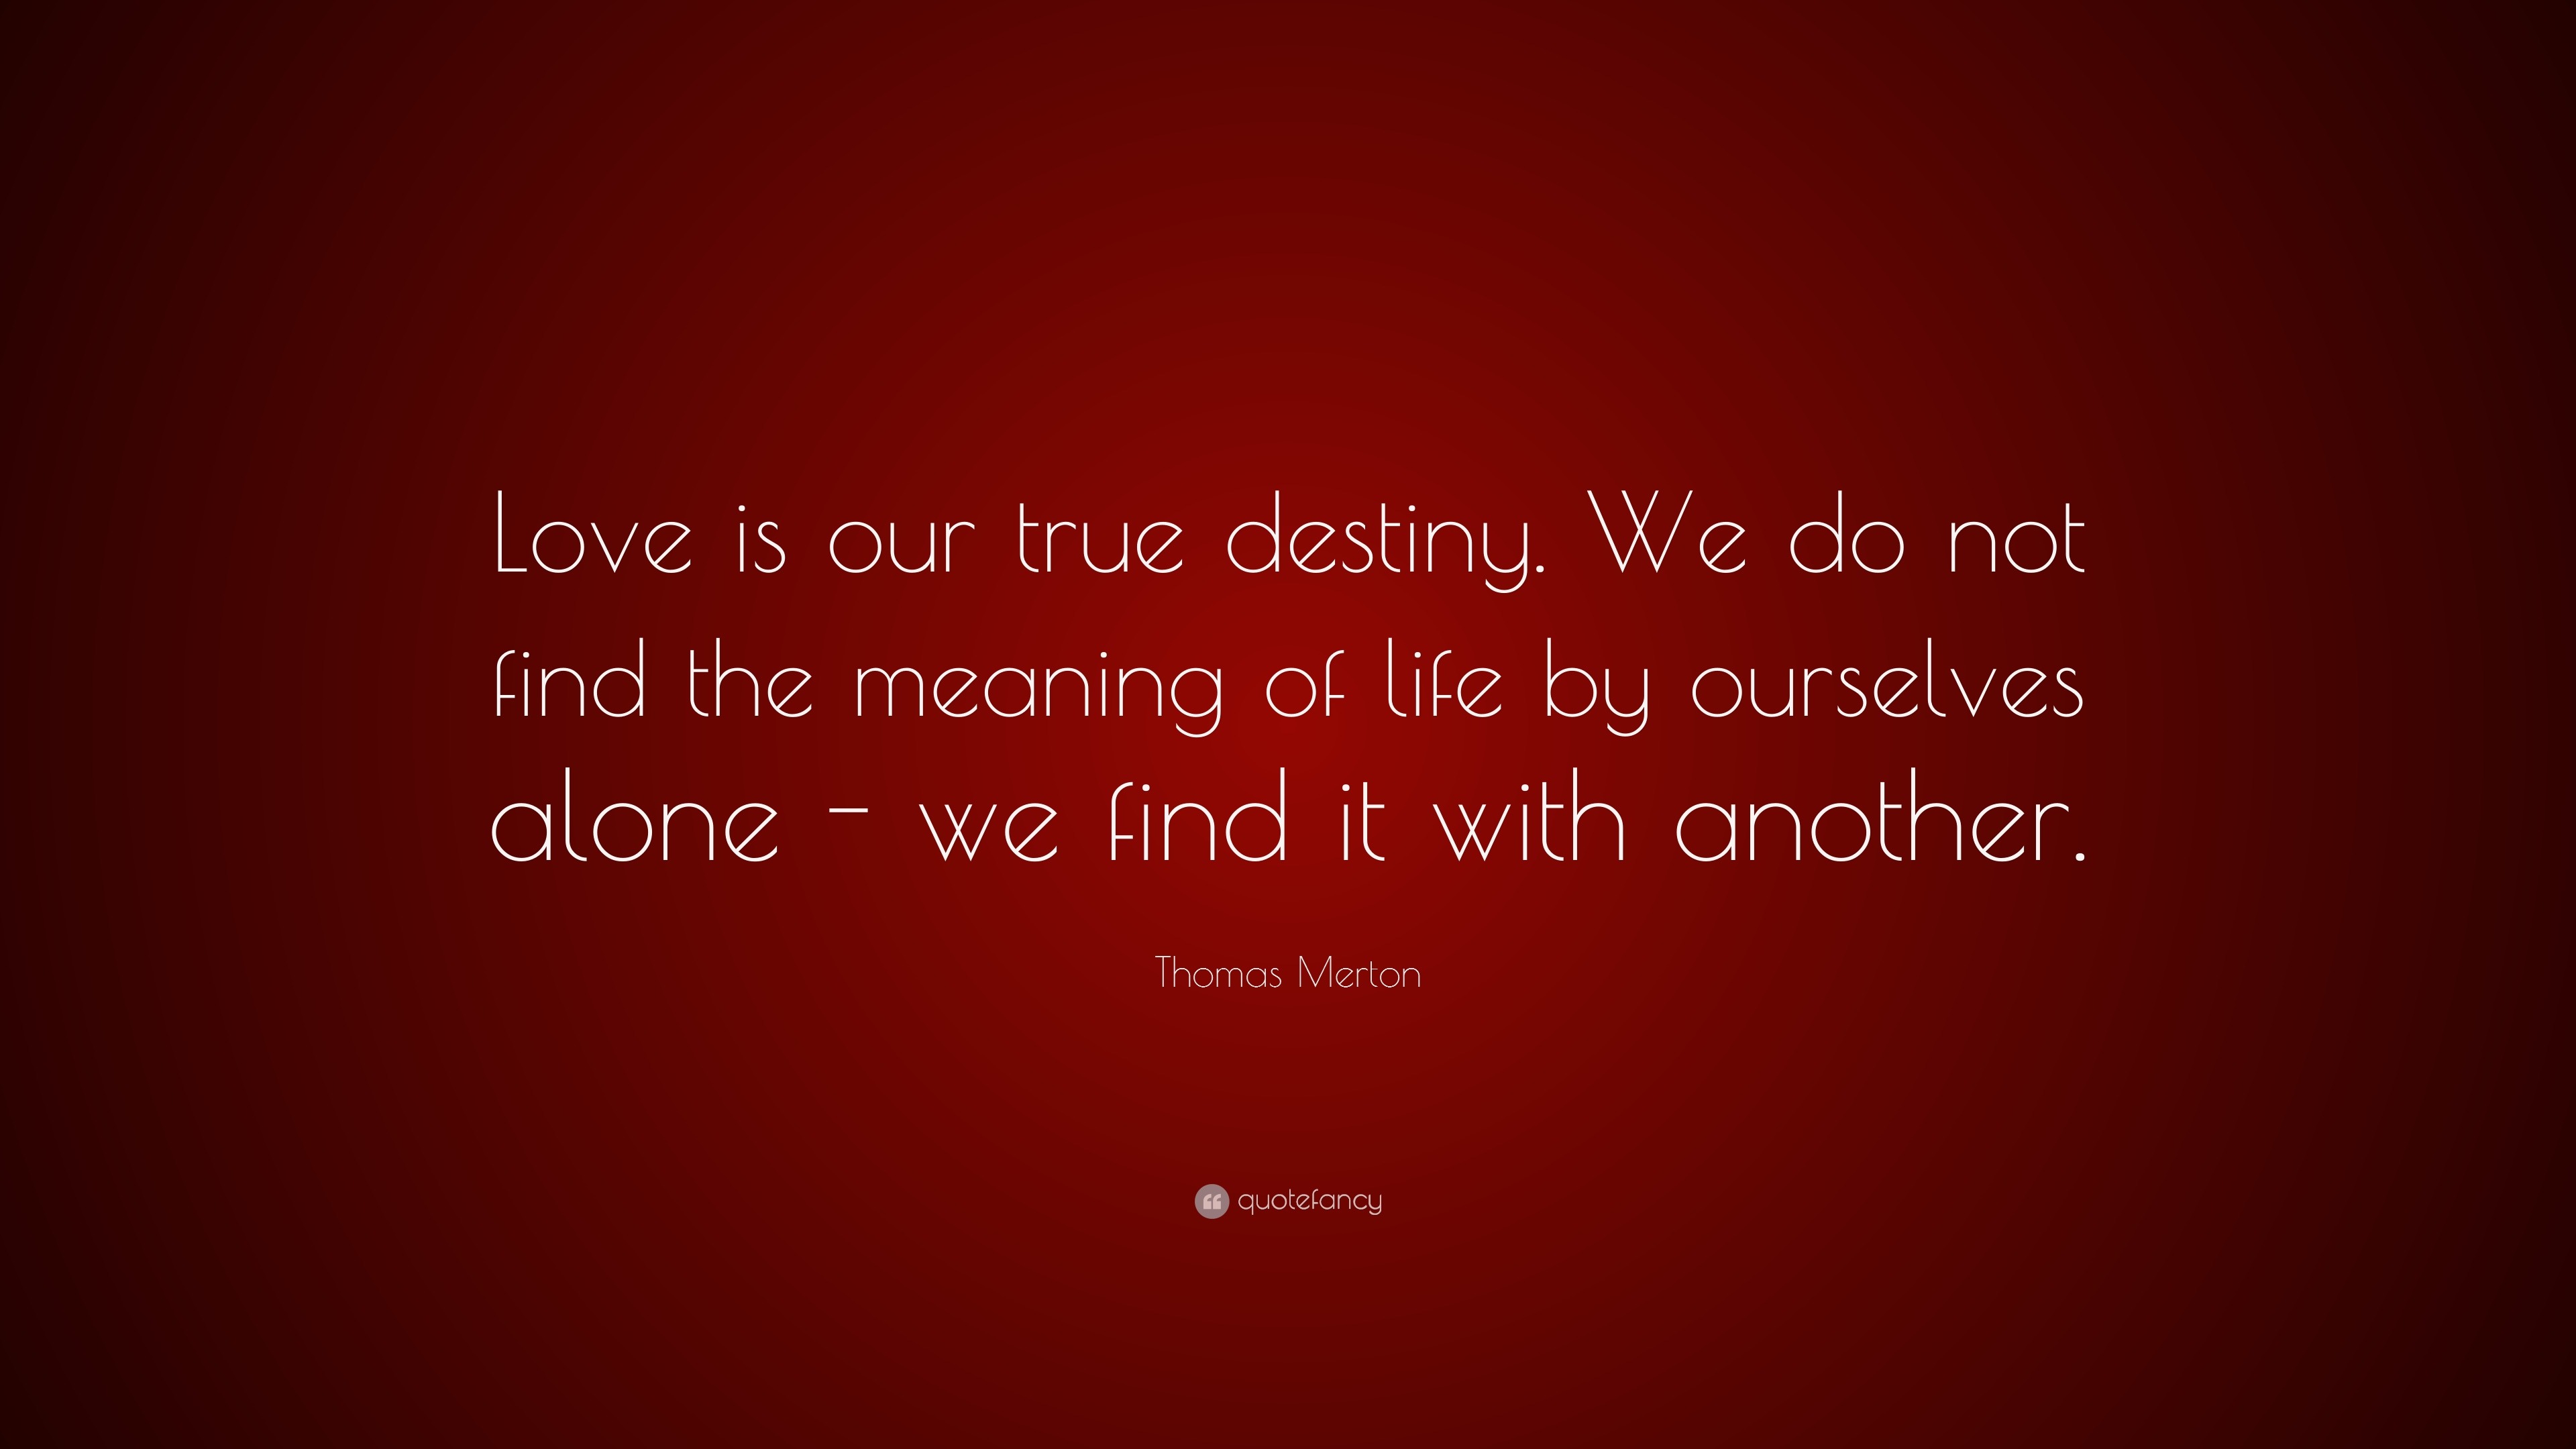 Thomas Merton Quote “Love is our true destiny We do not find the